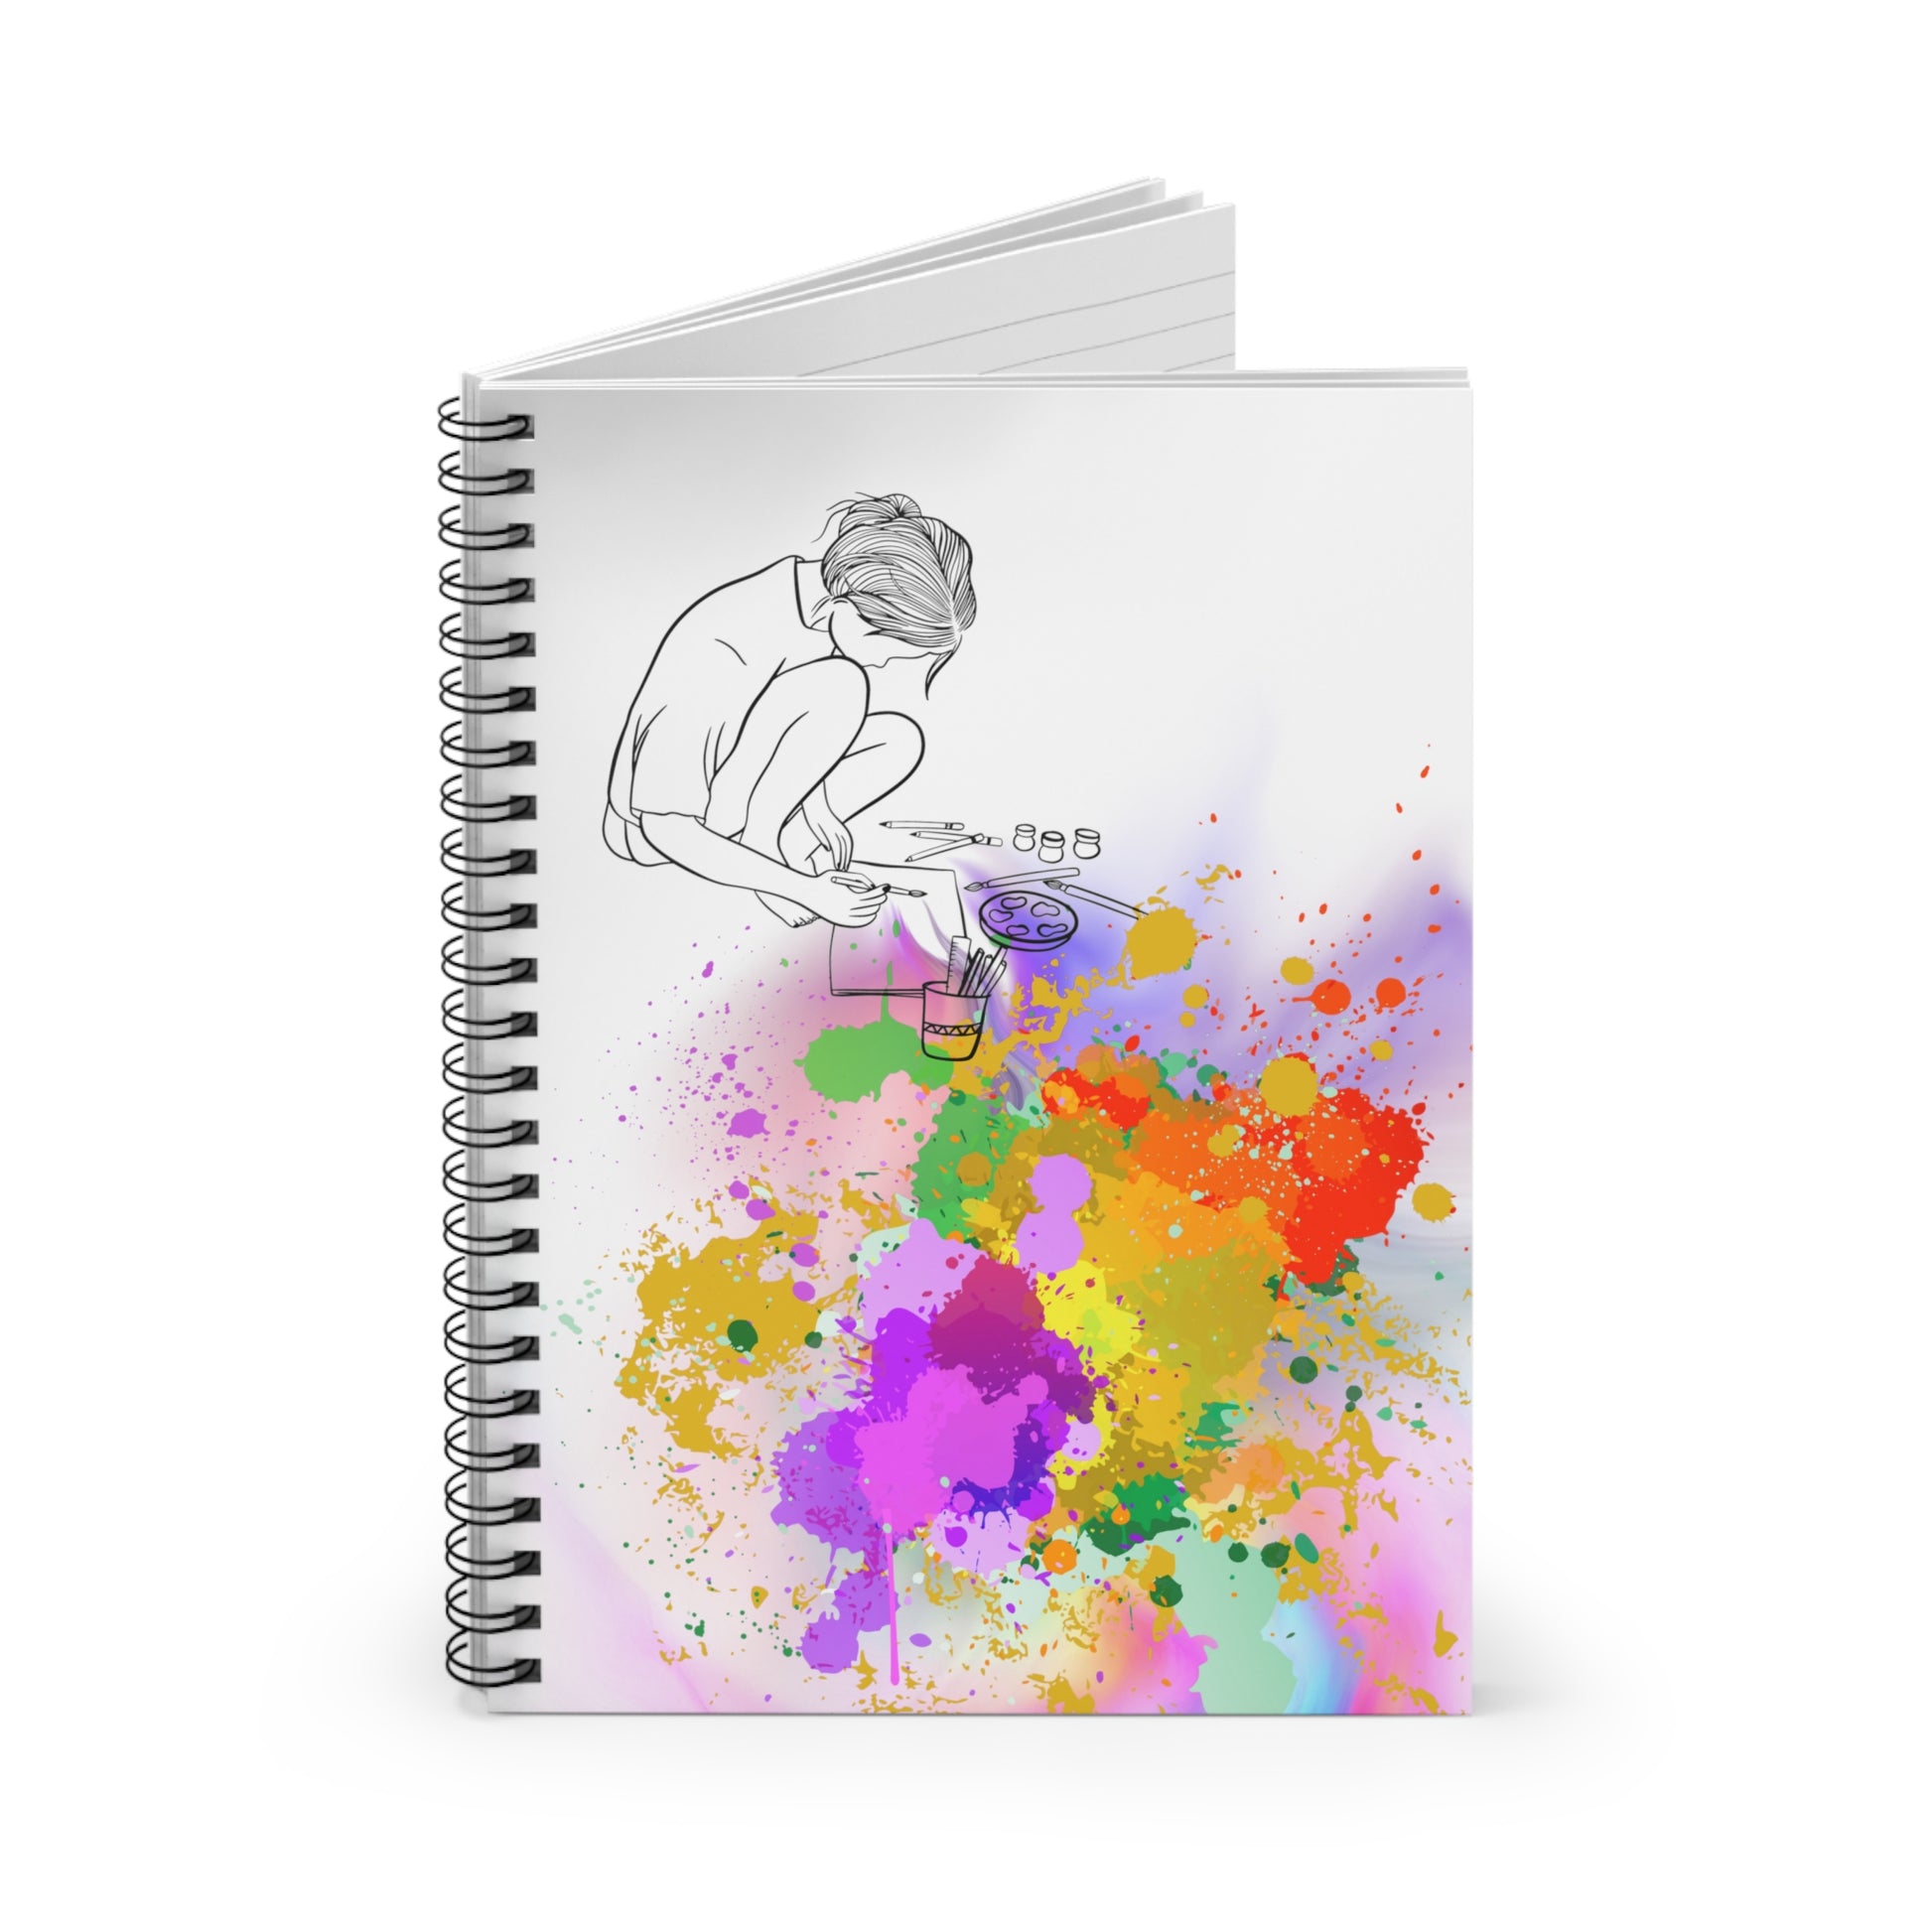 Dream Weaver: Spiral Notebook - Log Books - Journals - Diaries - and More Custom Printed by TheGlassyLass